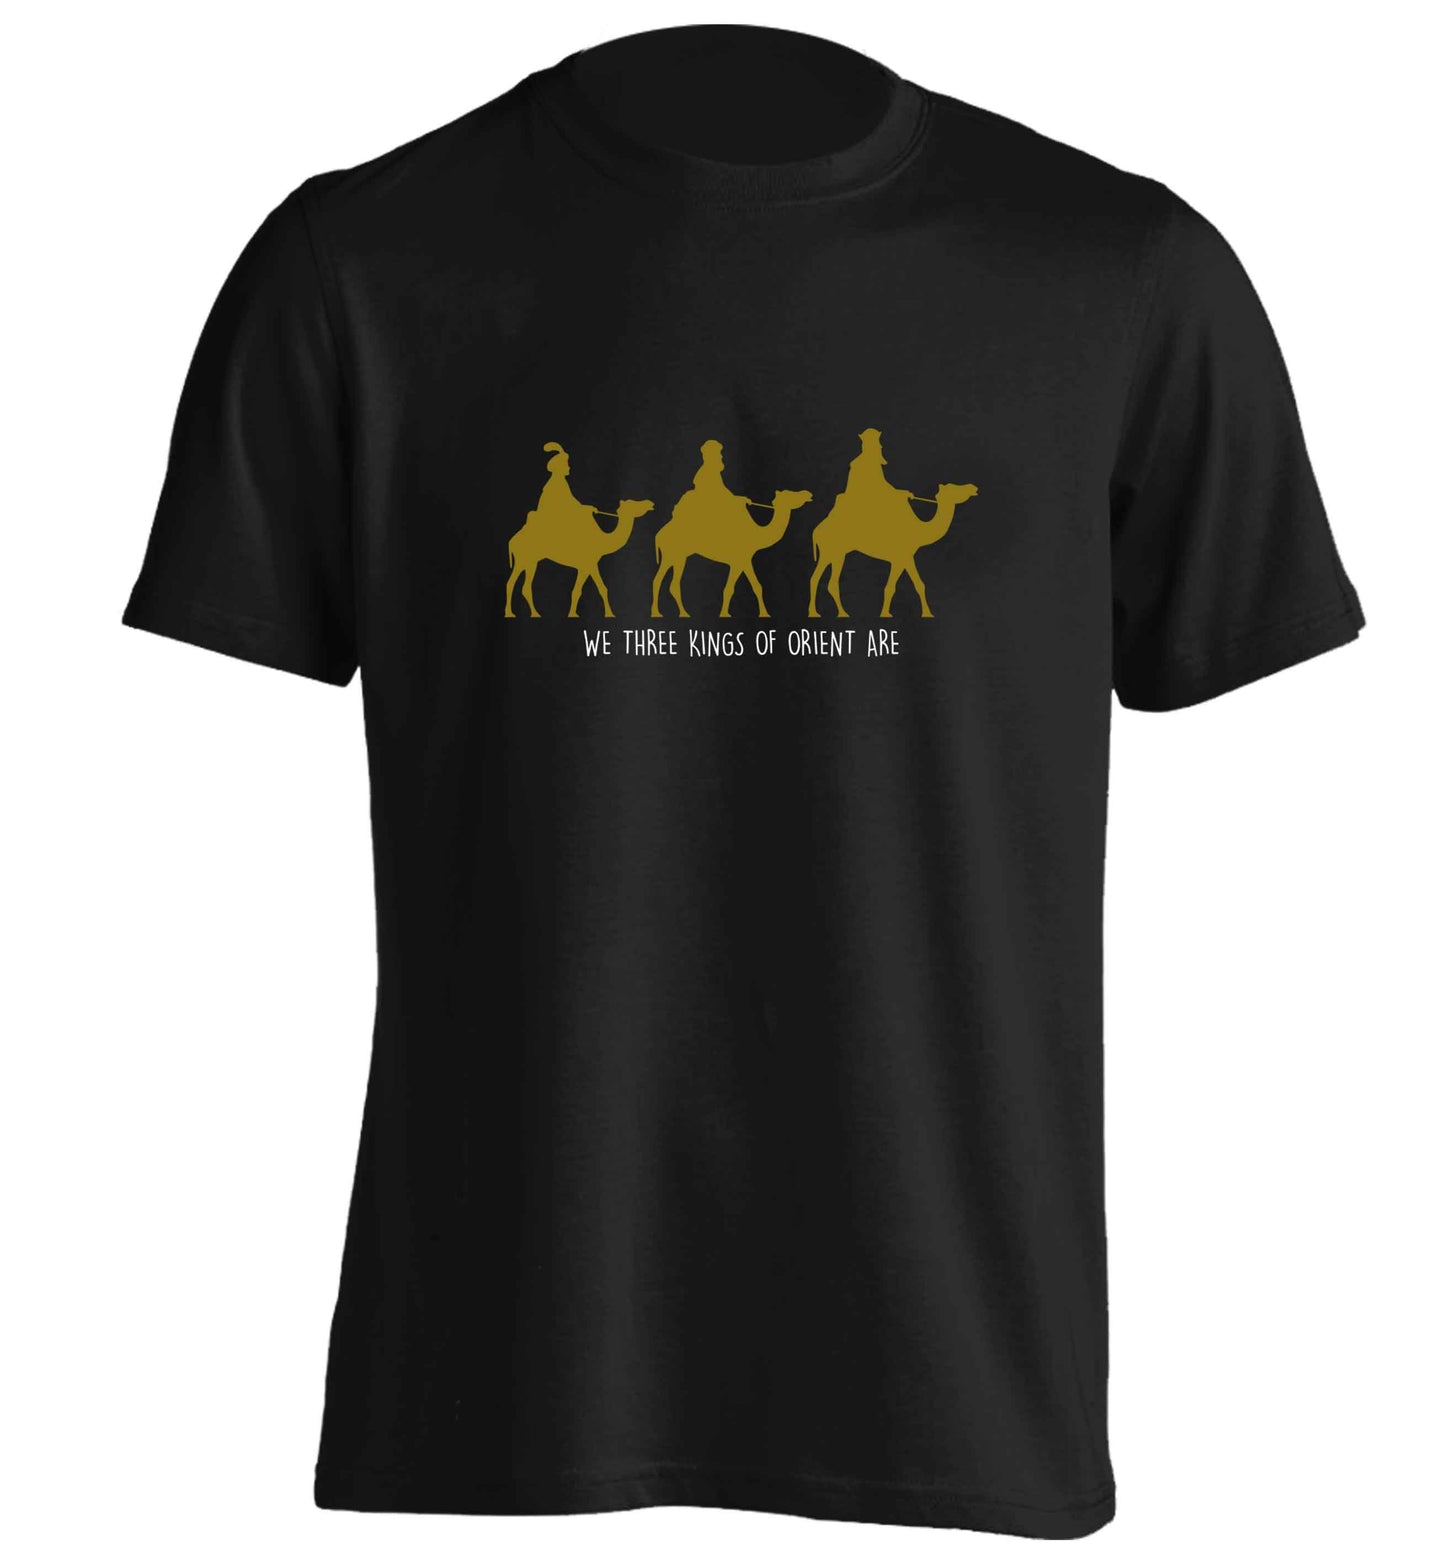 We three kings of orient are adults unisex black Tshirt 2XL